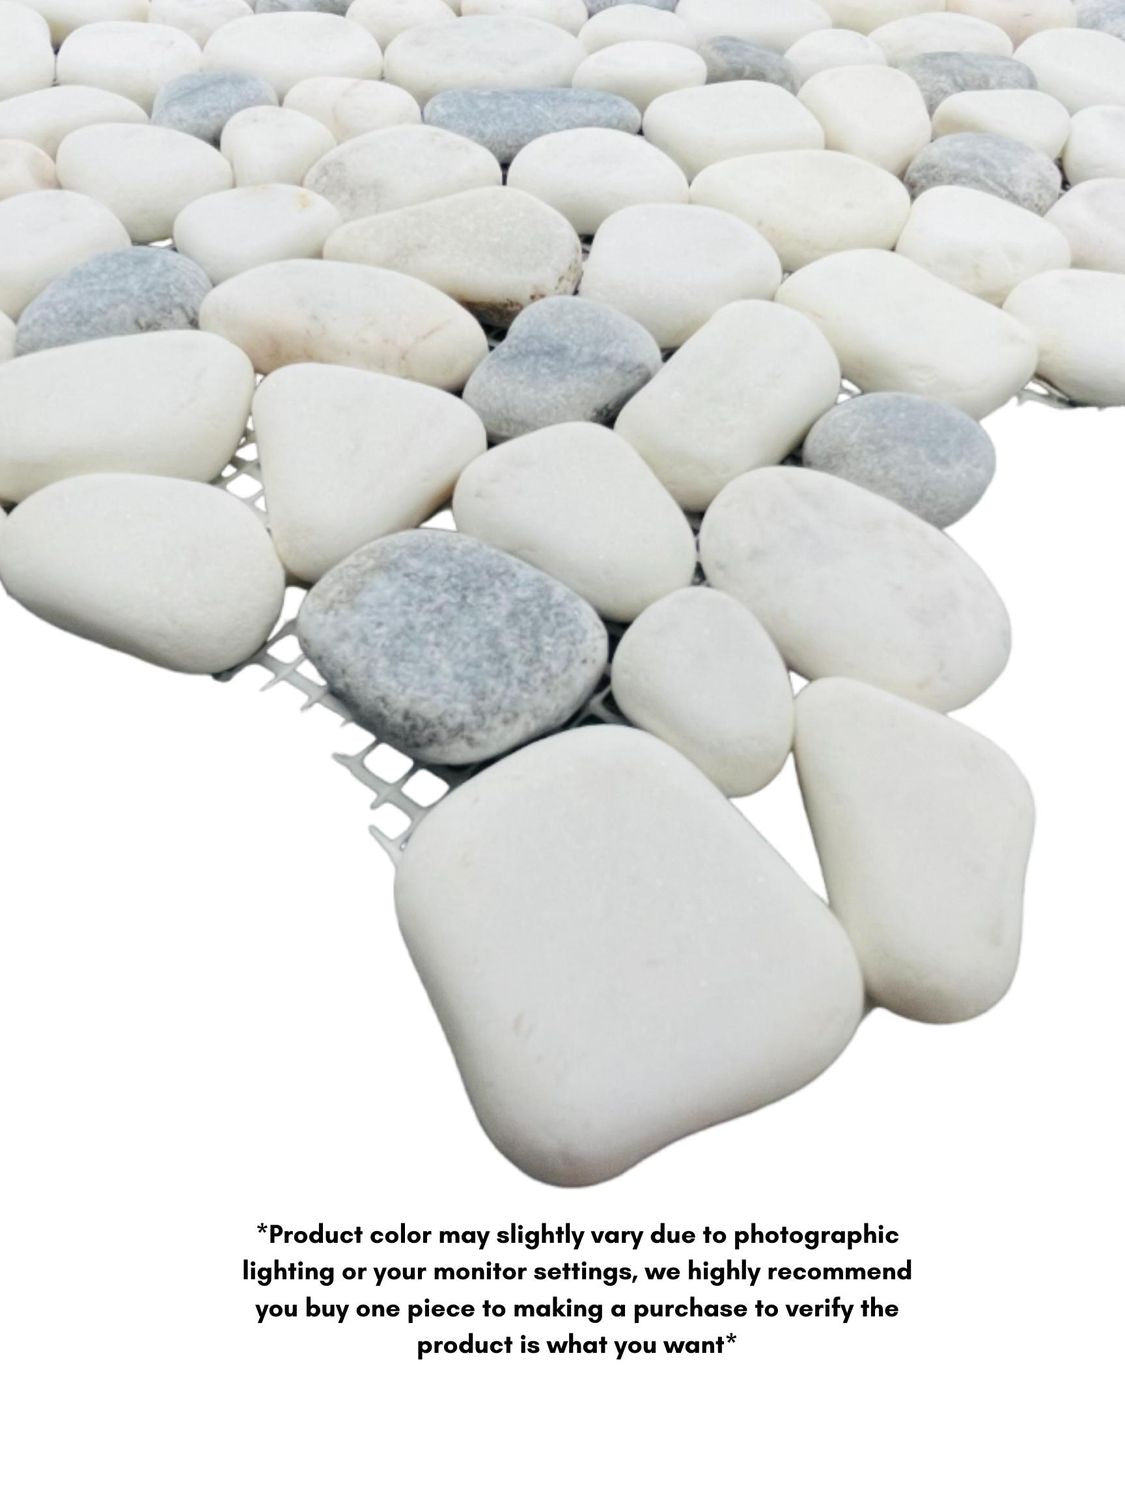 MS International White Polished Pebbles 12 in. x 12 in. Marble Floor & Wall Tile - Box of 5 sqf